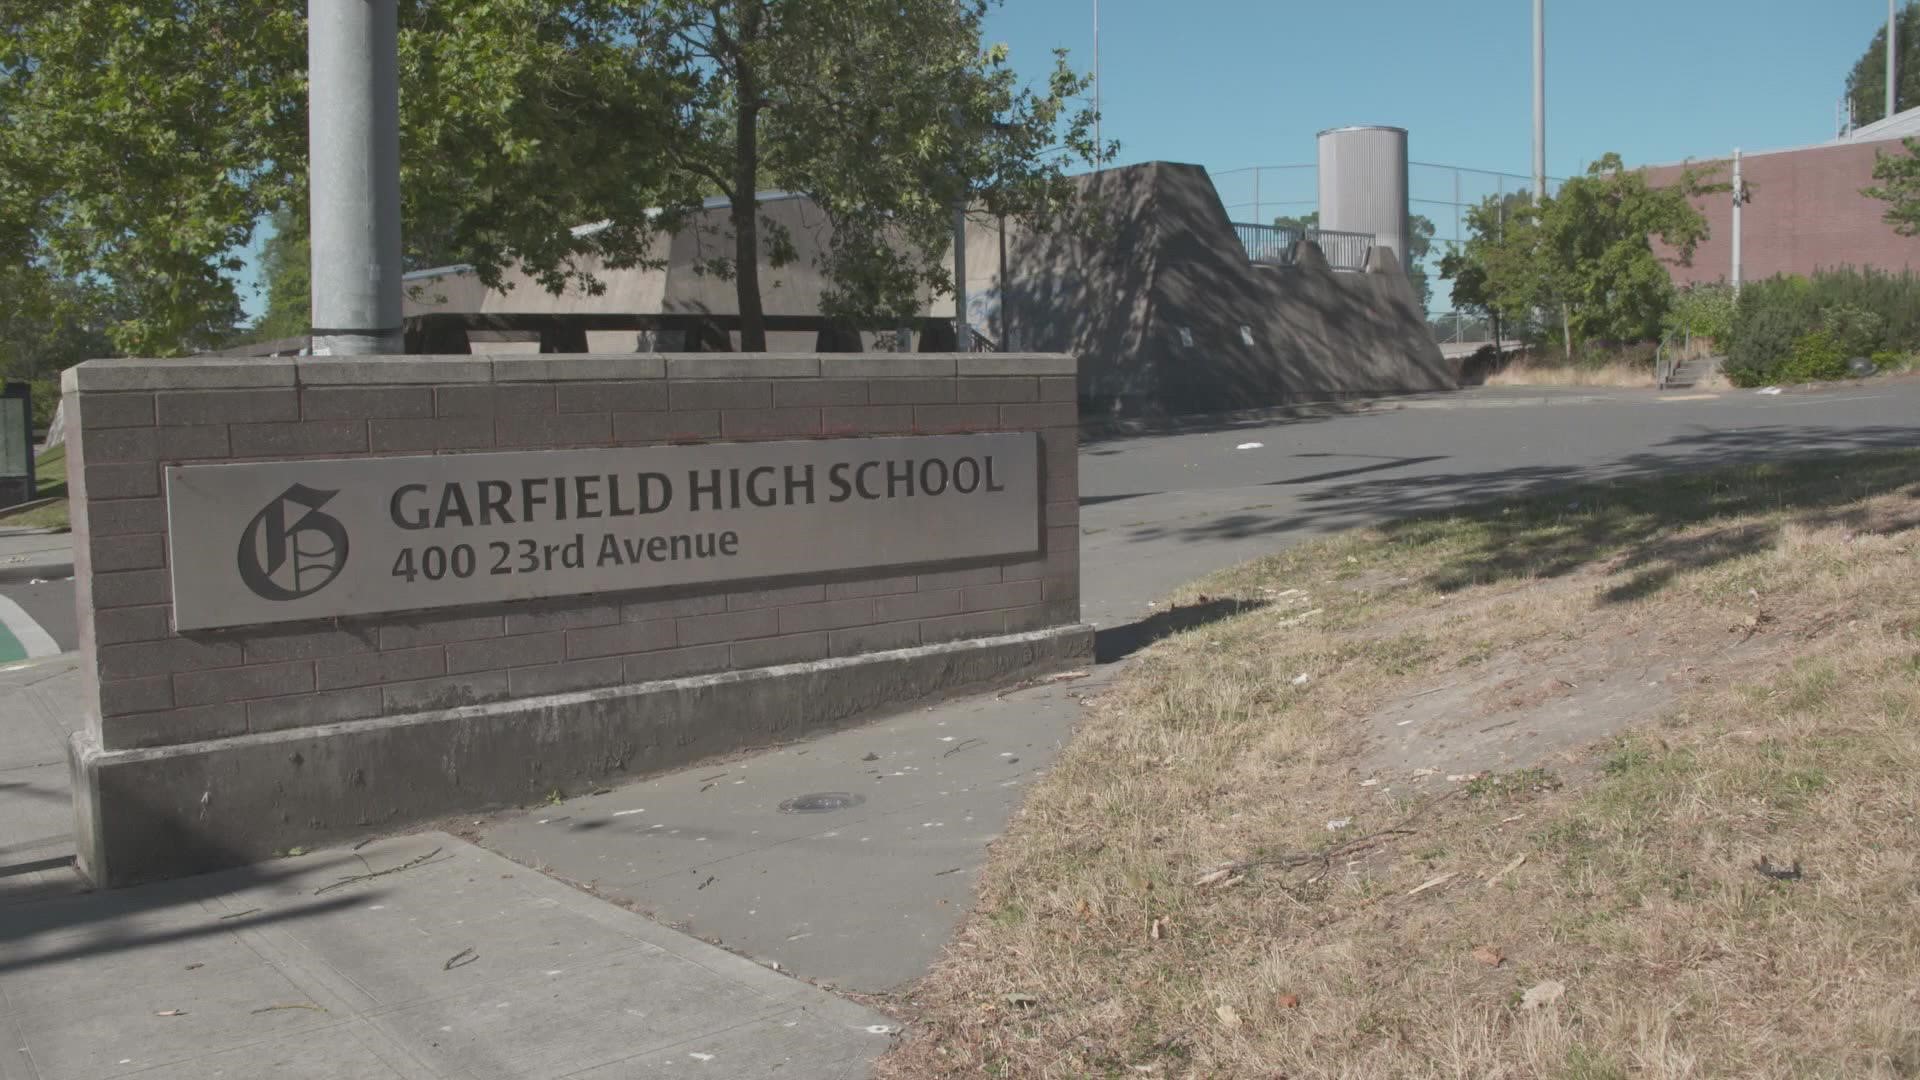 A former Garfield HS swim team member says school administrators pressured him to keep his mouth shut about alleged hazing he witnessed